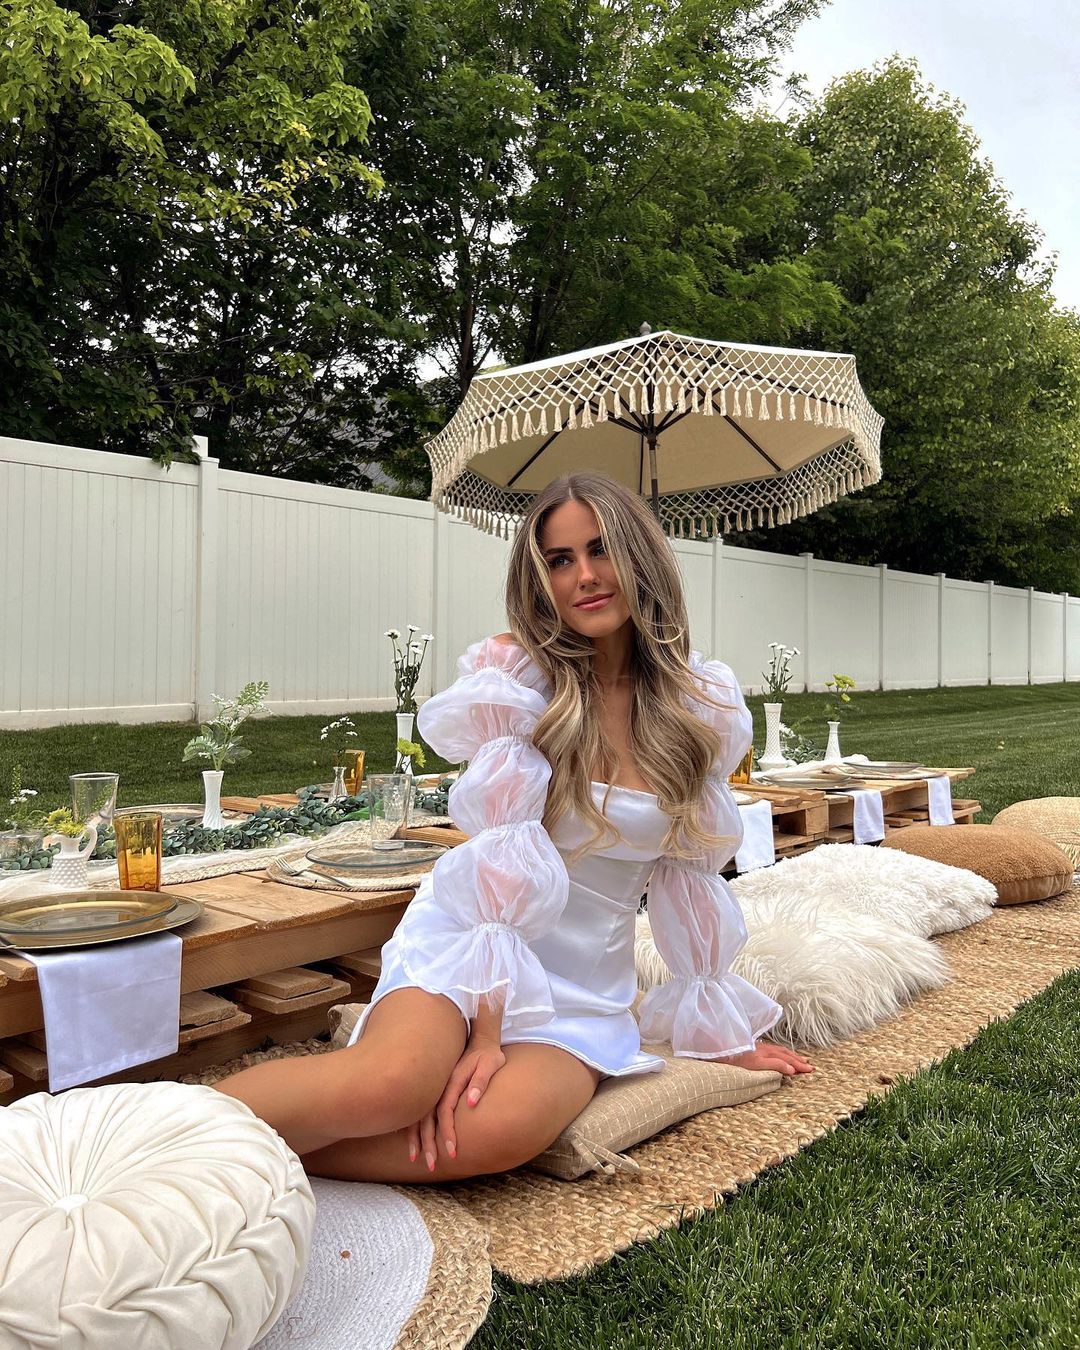 30 Ideas What to Wear to a Tea Party for Chic Look